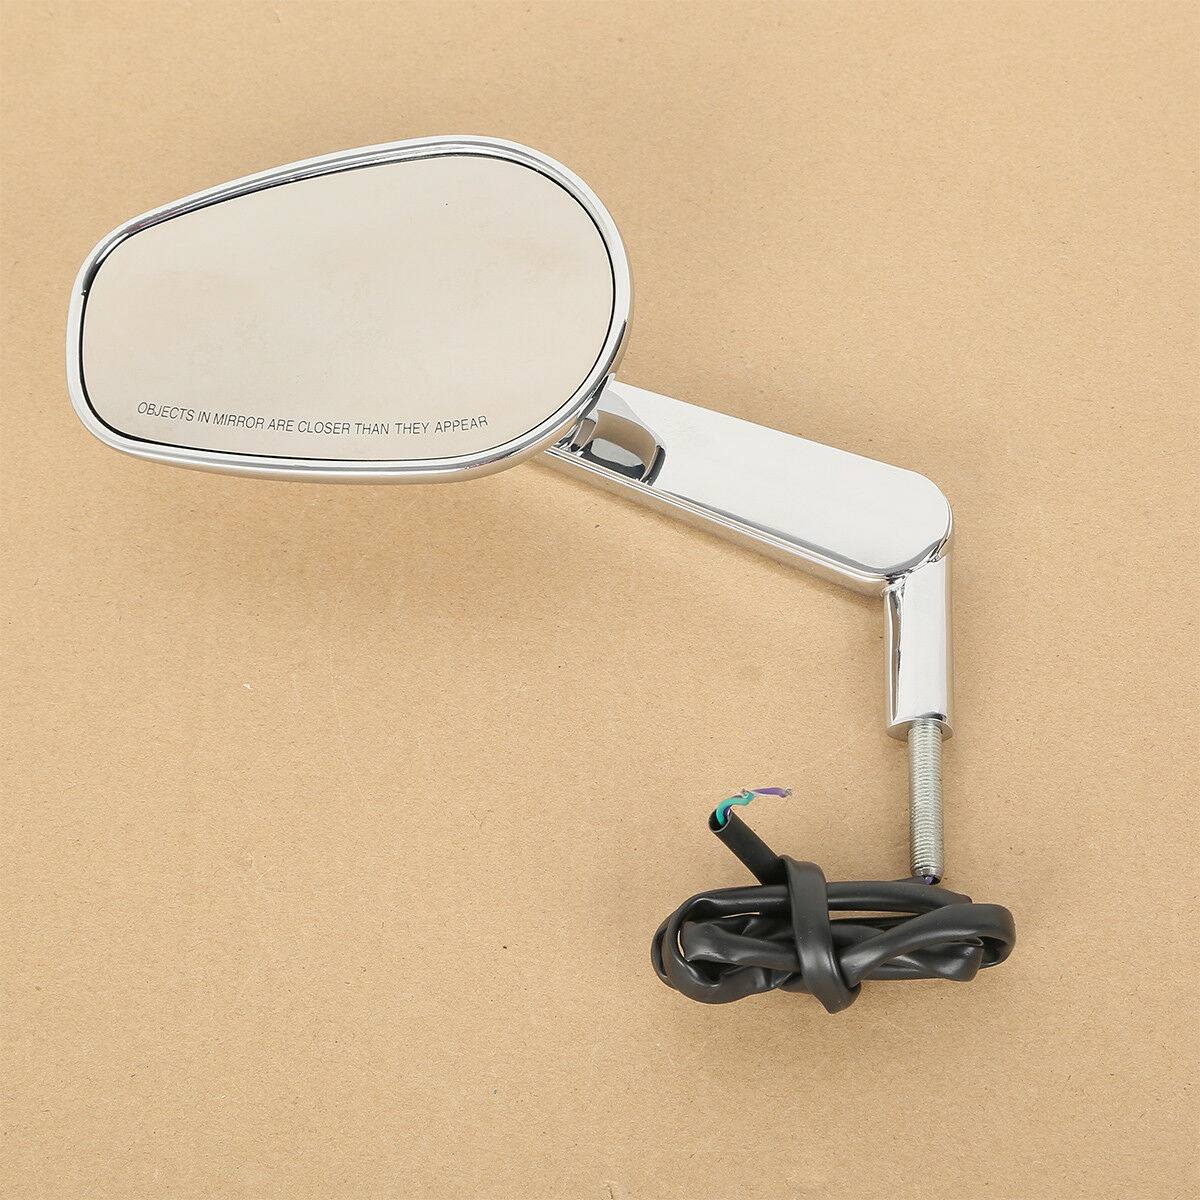 Rearview Mirrors W/ LED Turn Signals Fit For Harley Davidson V-Rod VRSCF 09-17 - Moto Life Products